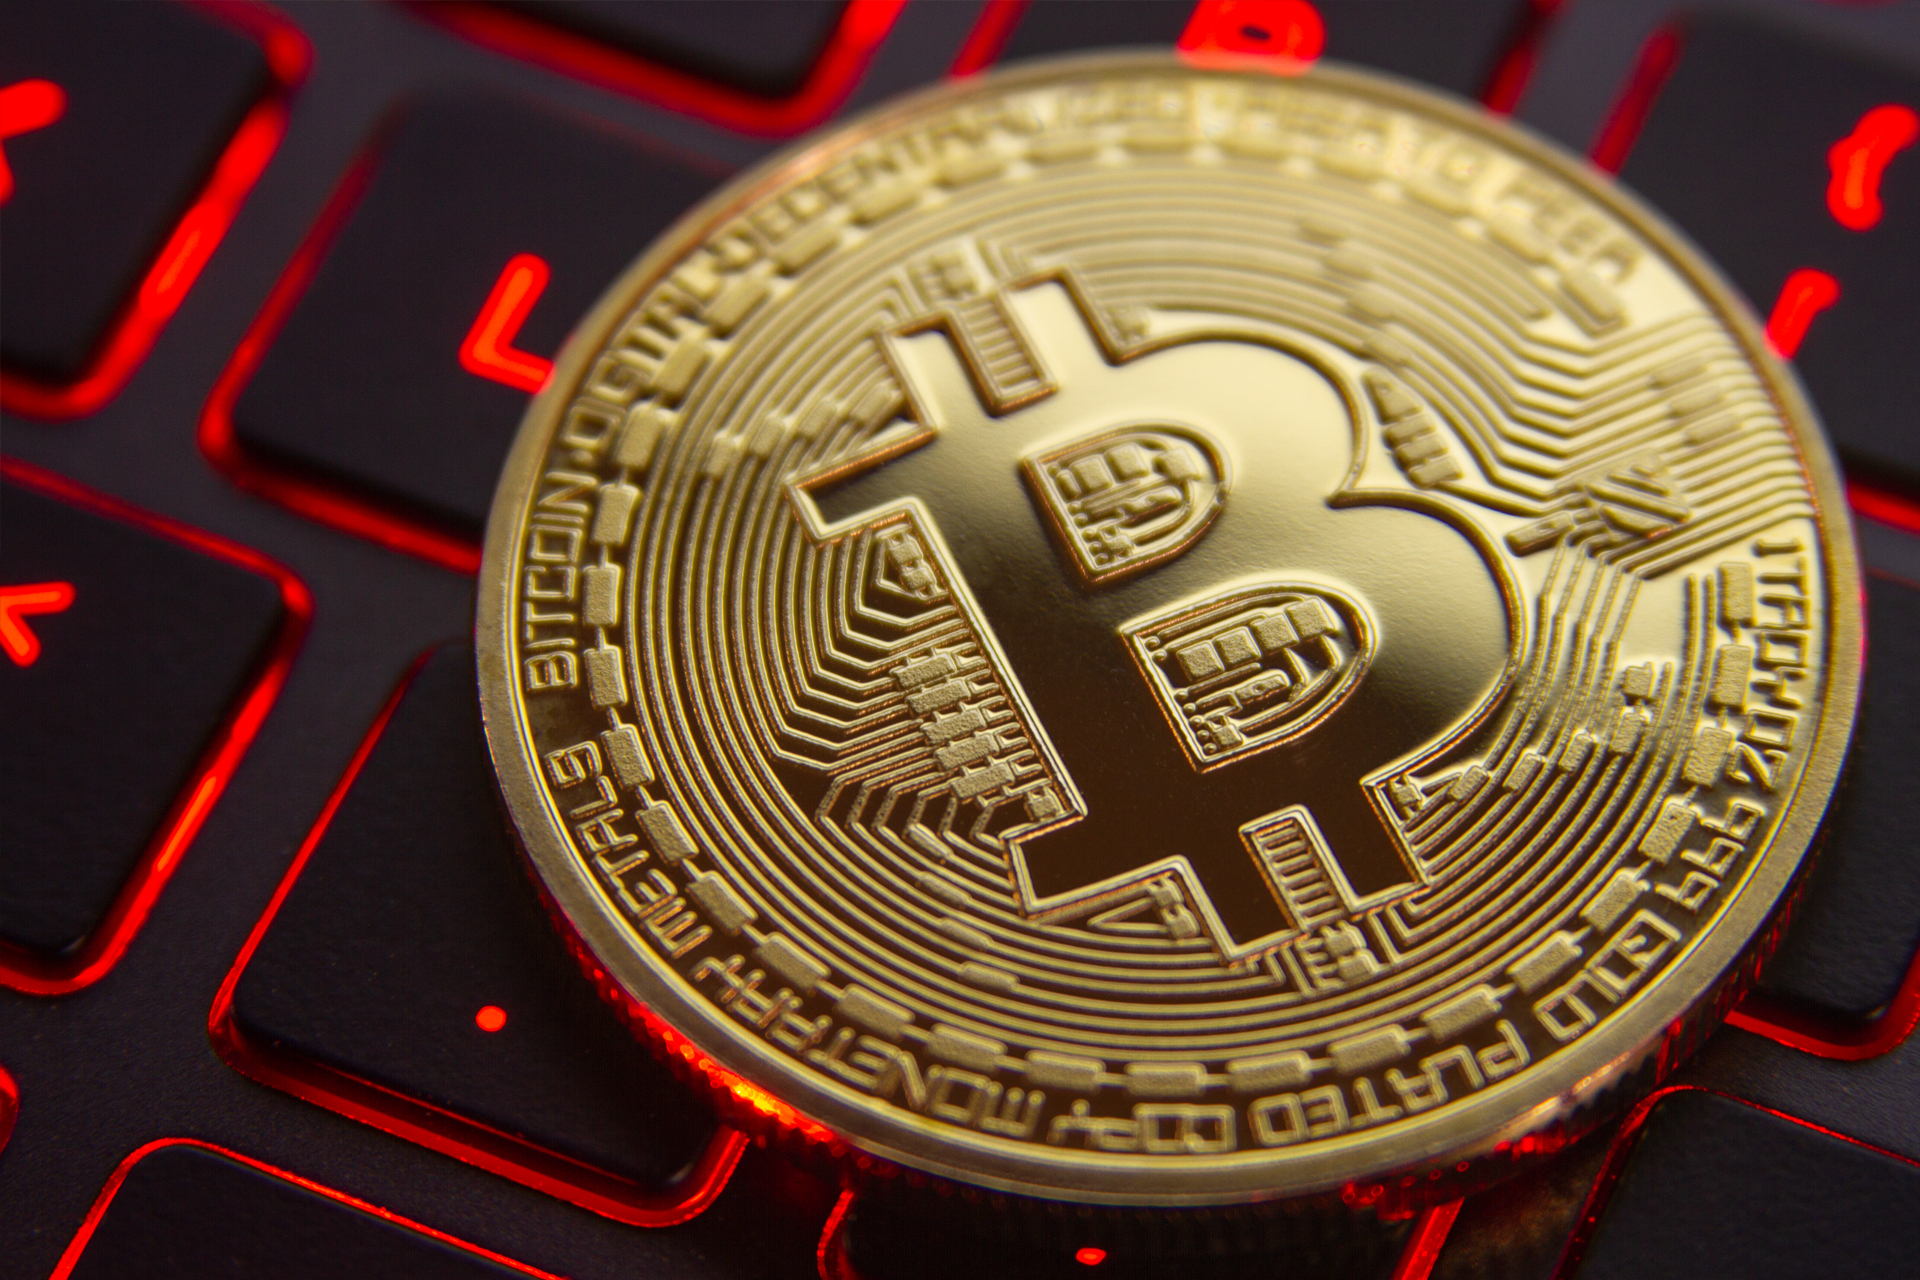 Bitcoin on red lit keyboard free image download